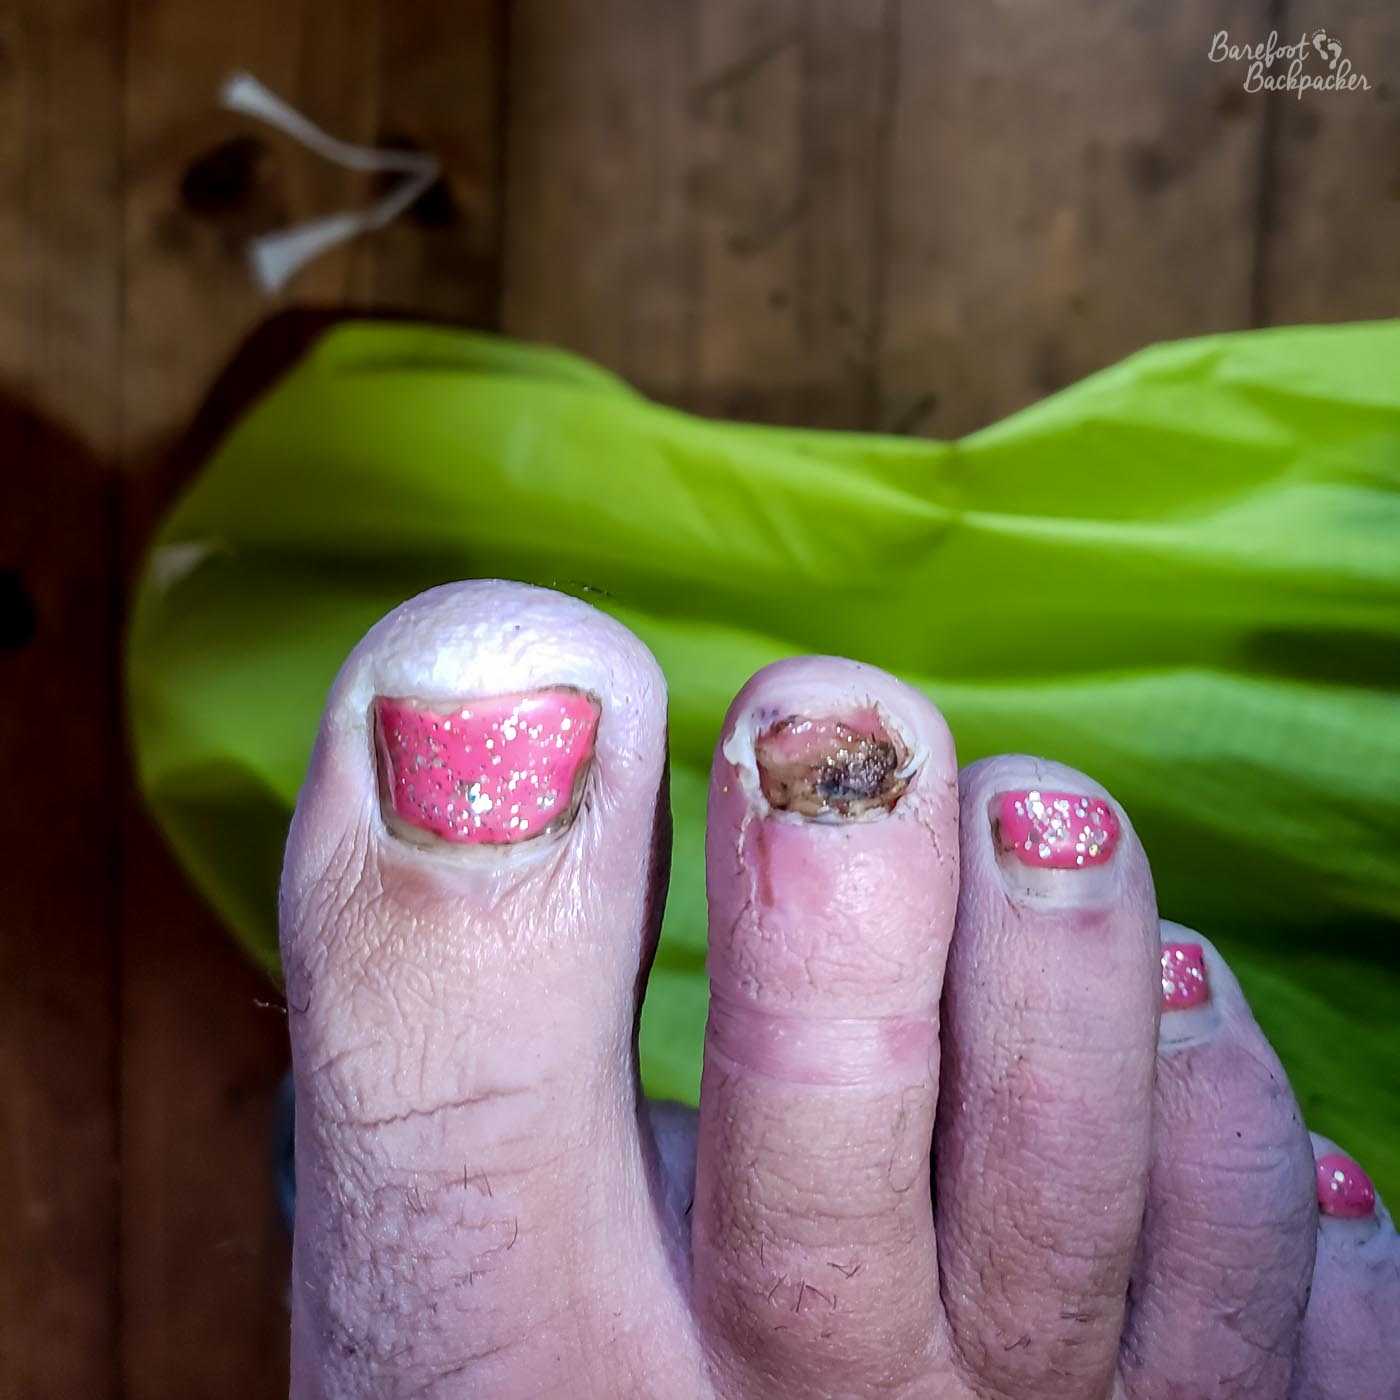 A close-up of the toes on someone's right foot. They are quite wrinkled because they have been hiking in the rain, even with socks and walking shoes on. Four of the toes have sparkly pink nail varnish. The toe nearest the big toe however has a black and red gelatinous vibe to it. There is no toenail, only a wound.